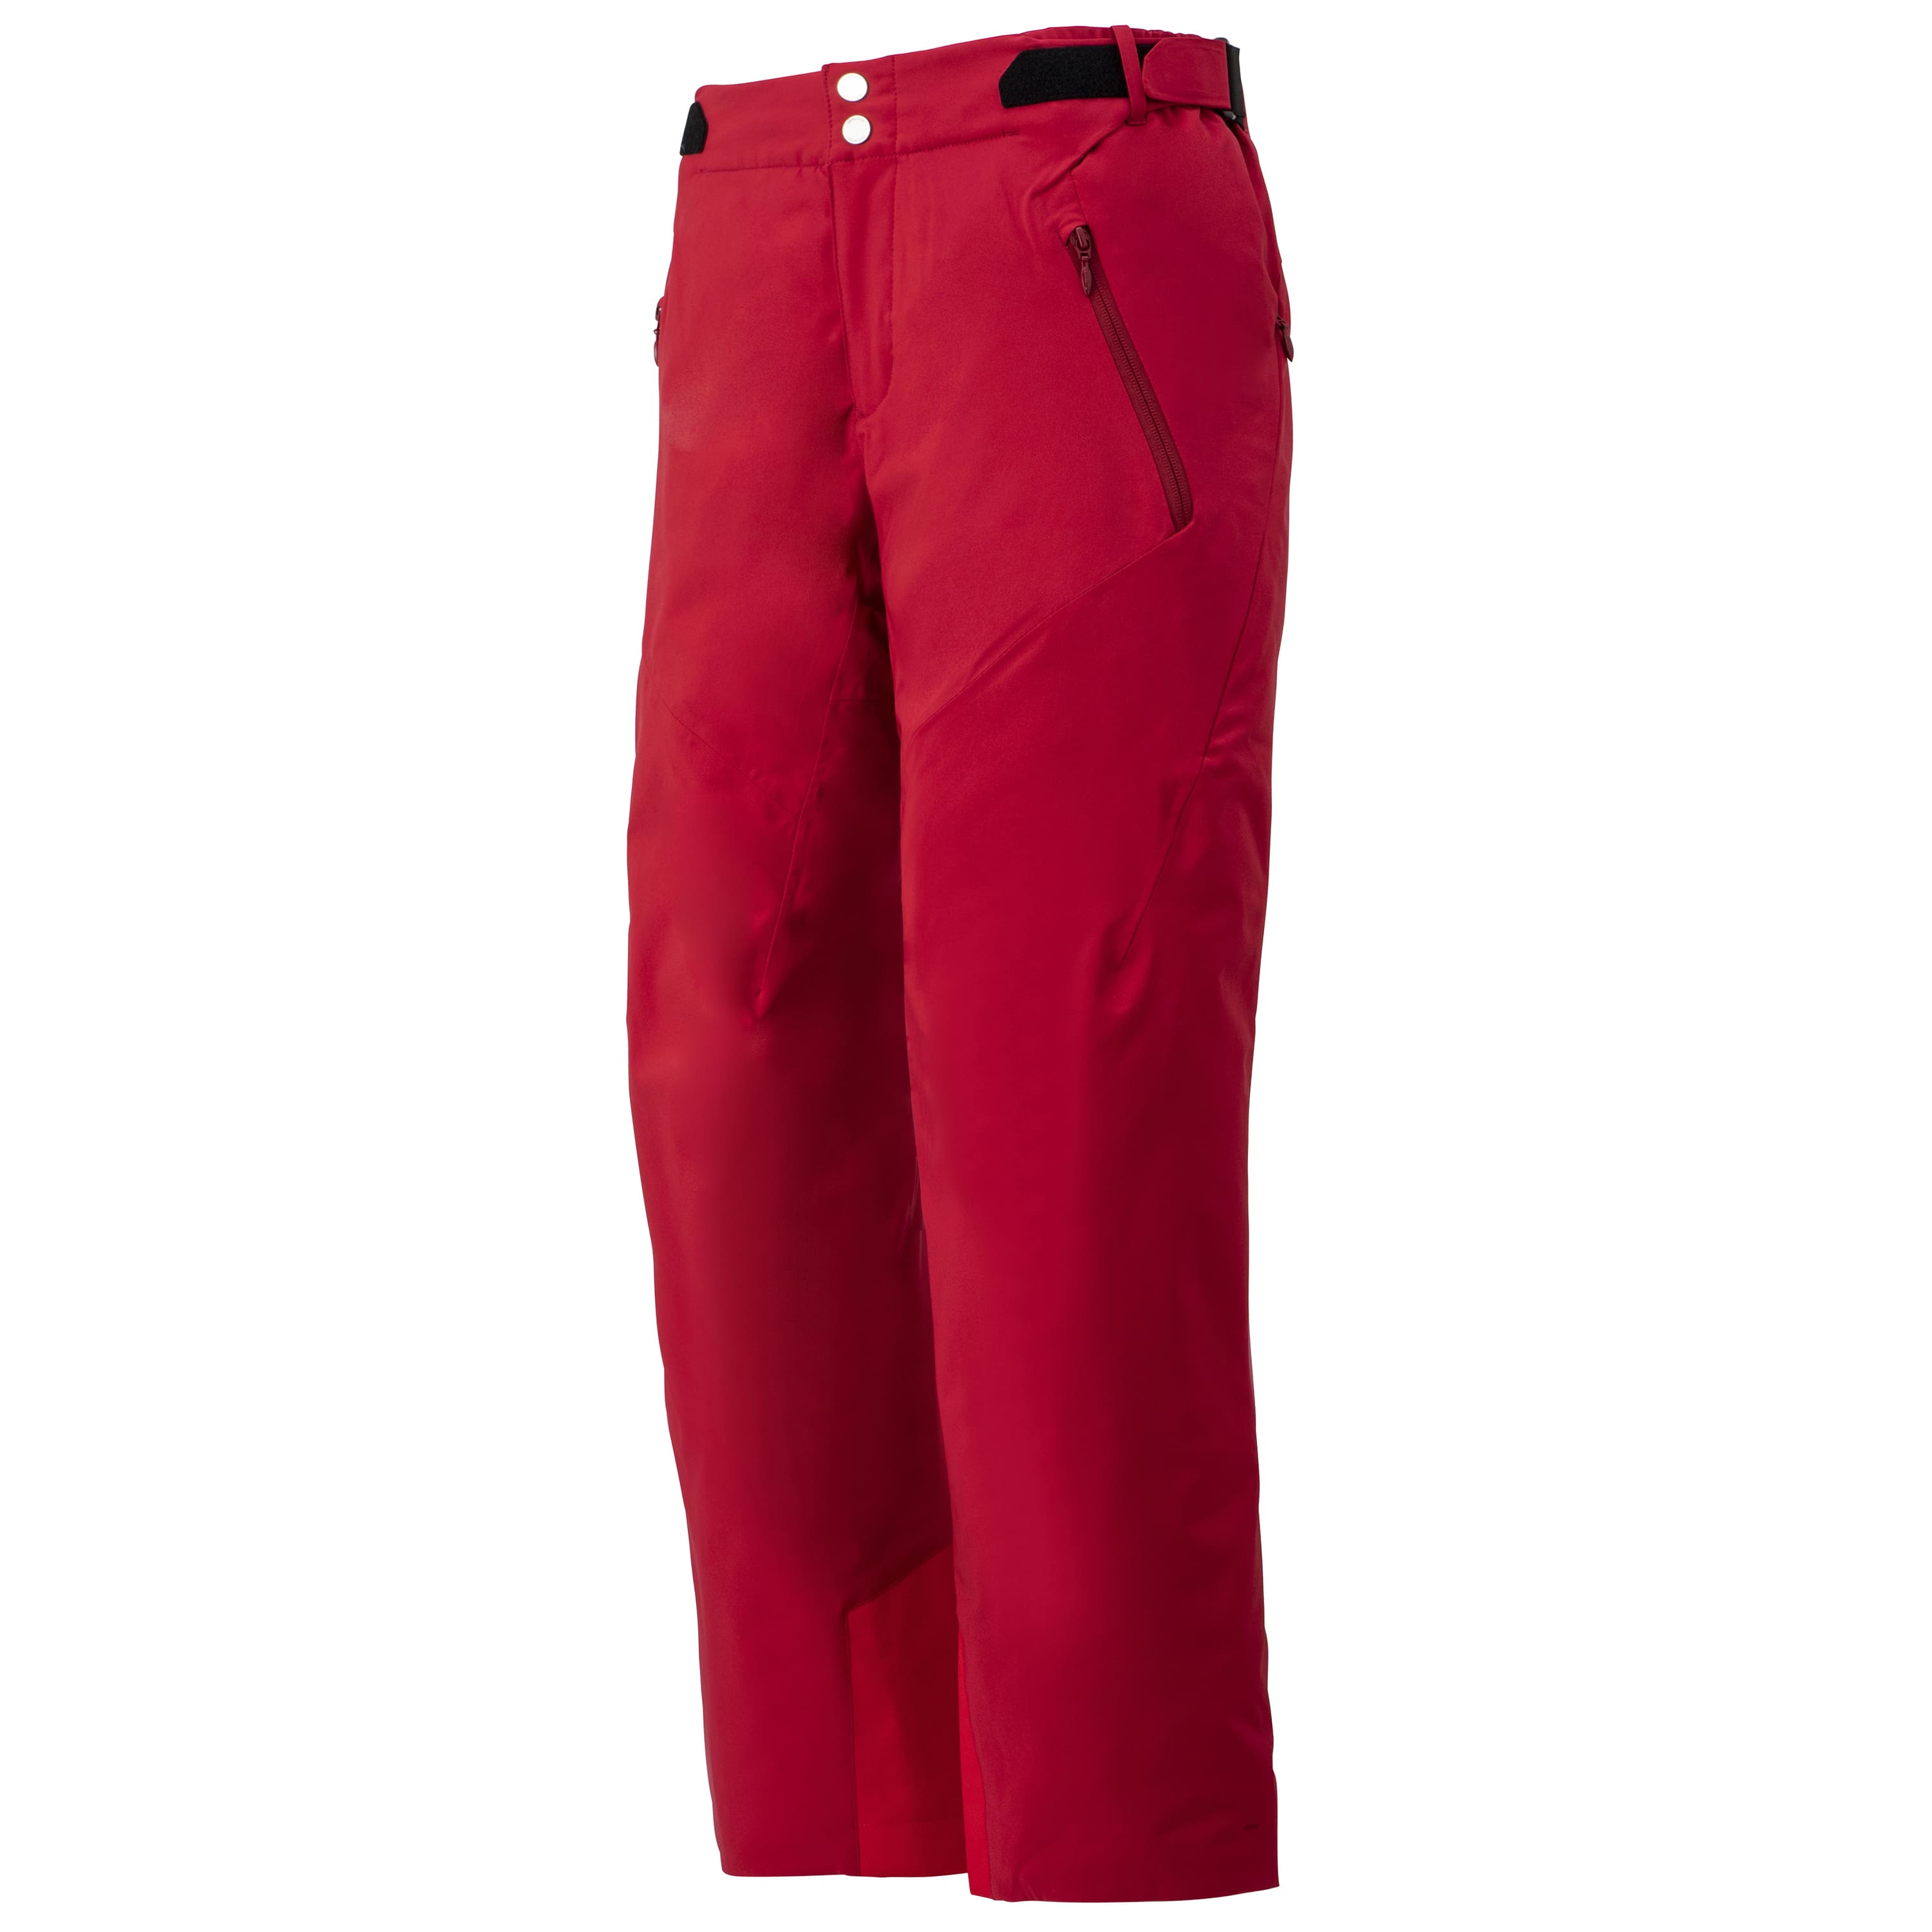 S.I.O INSULATED PANTS (Women’s Silhouette)